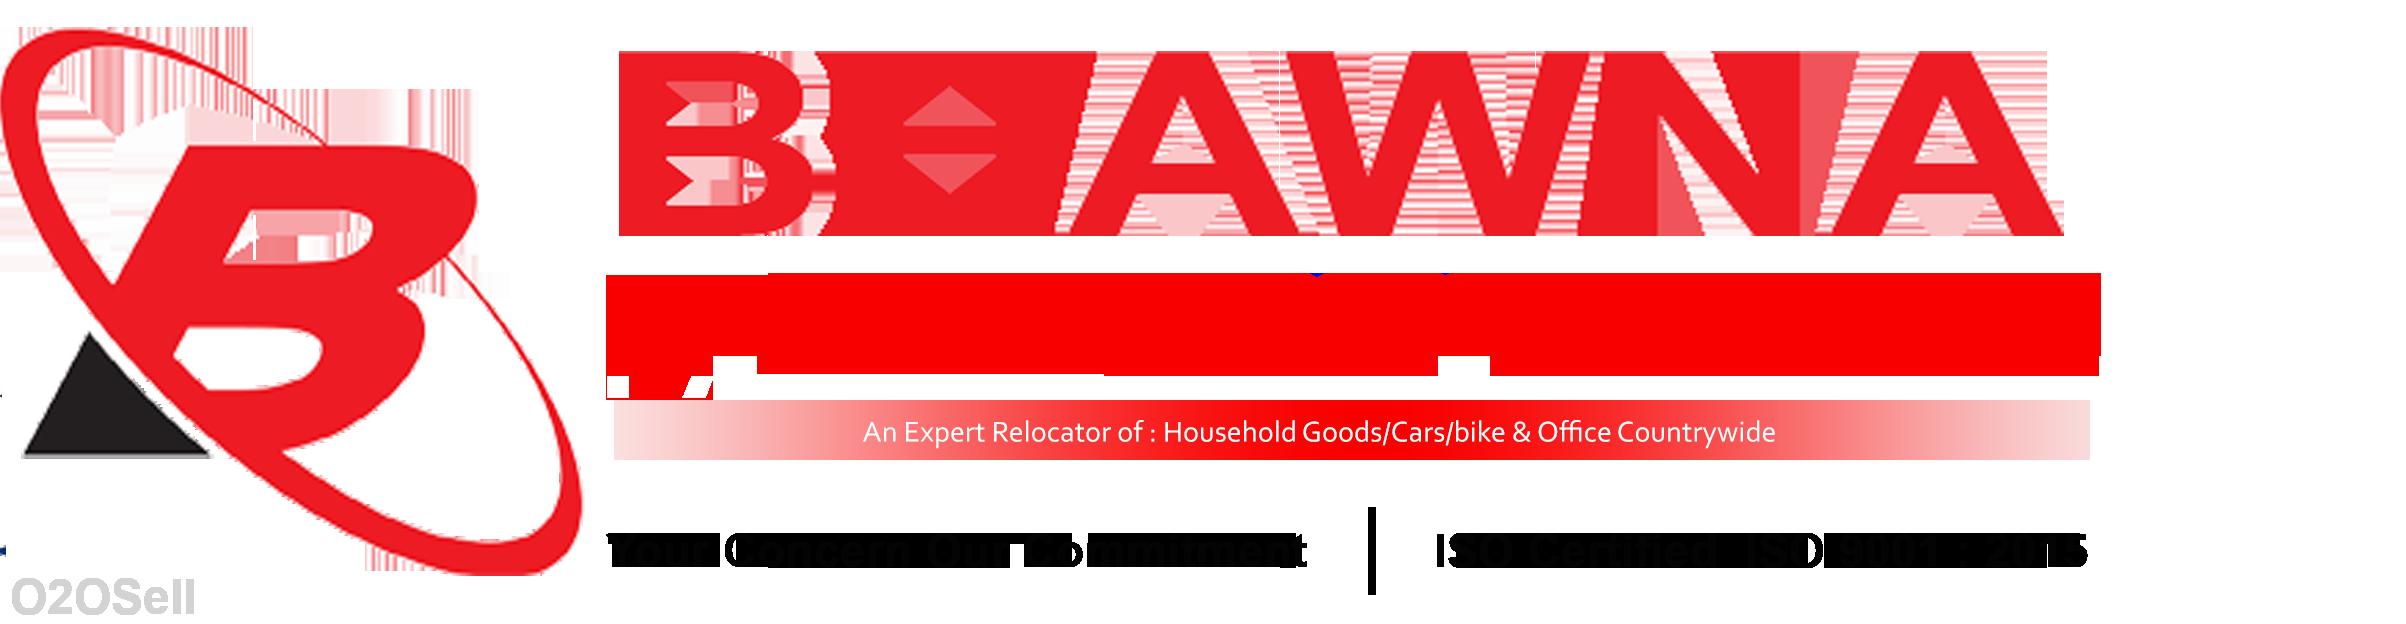 Bhawna Packers And Movers - Profile Image